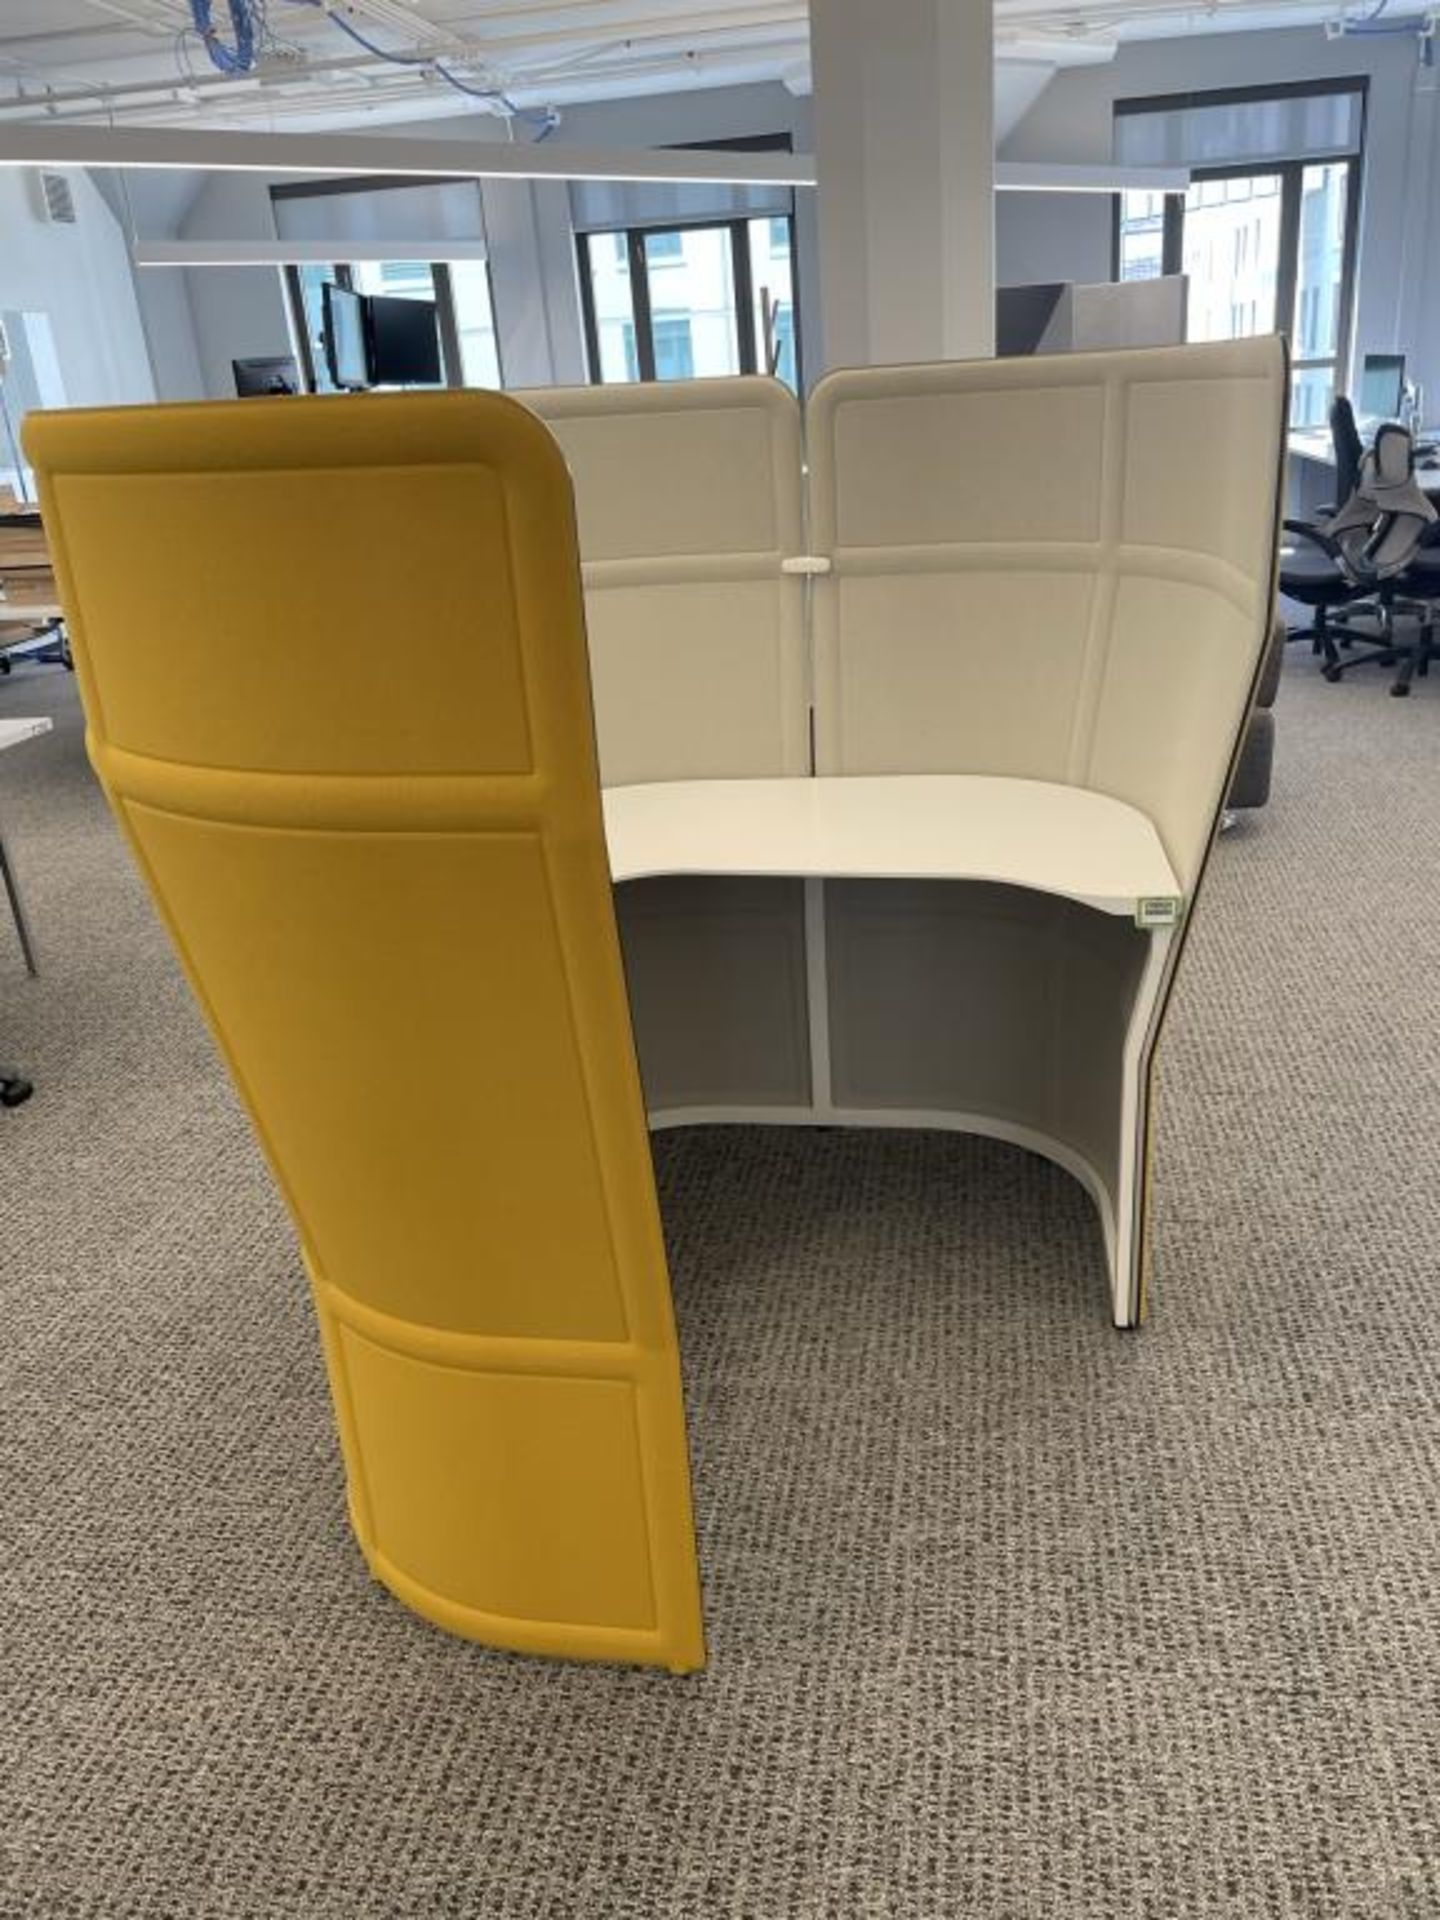 Haworth Openest Privacy Desk Yellow - Image 2 of 4